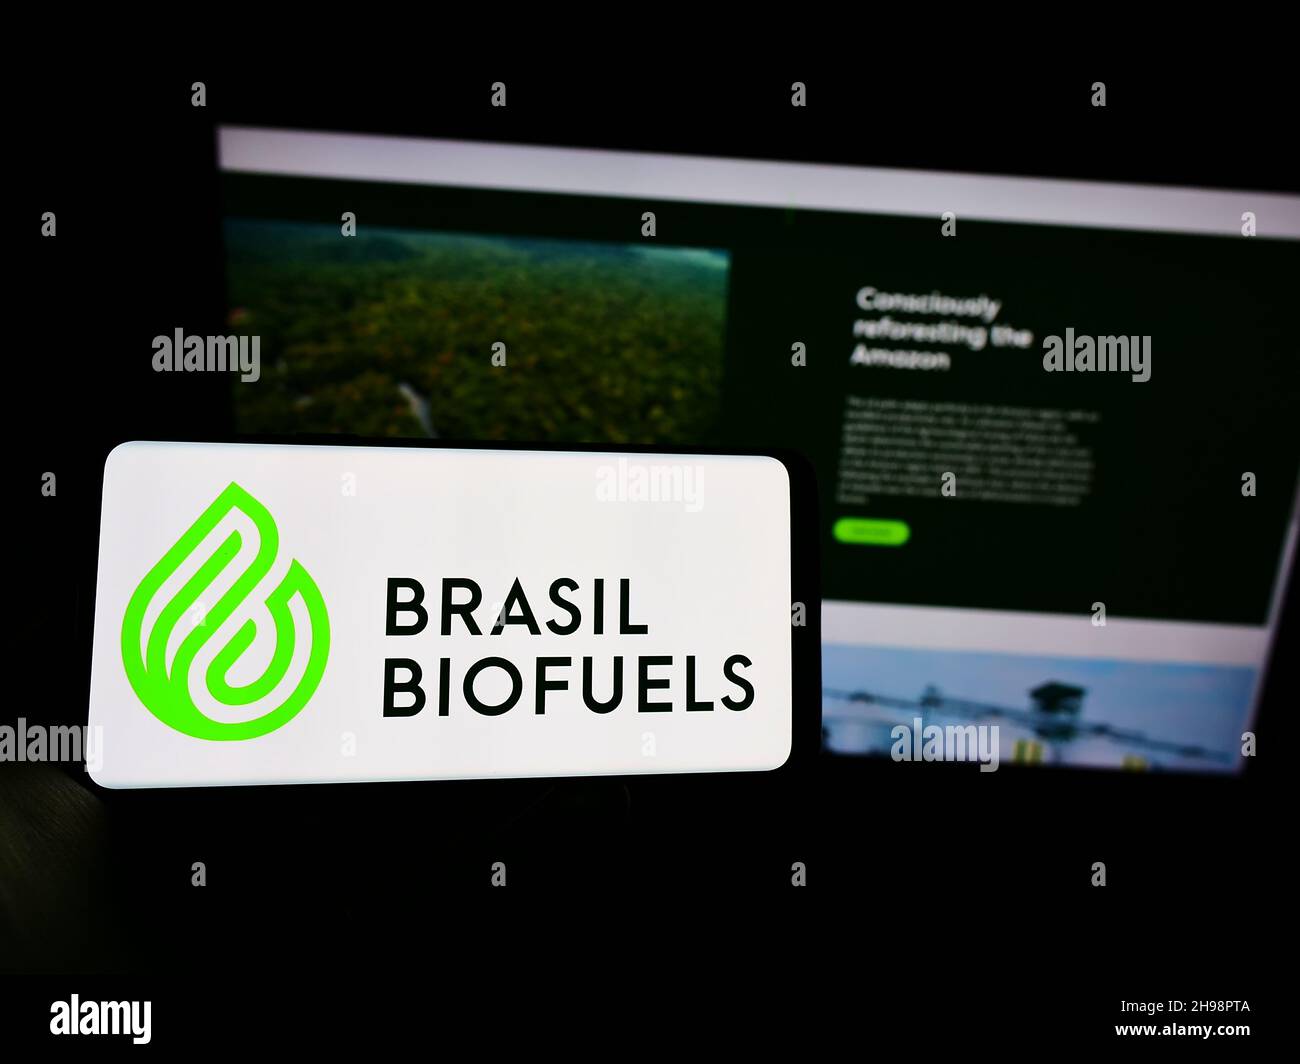 Person holding cellphone with logo of company BBF Brasil Bio Fuels S.A. (BioFuels) on screen in front of business webpage. Focus on phone display. Stock Photo